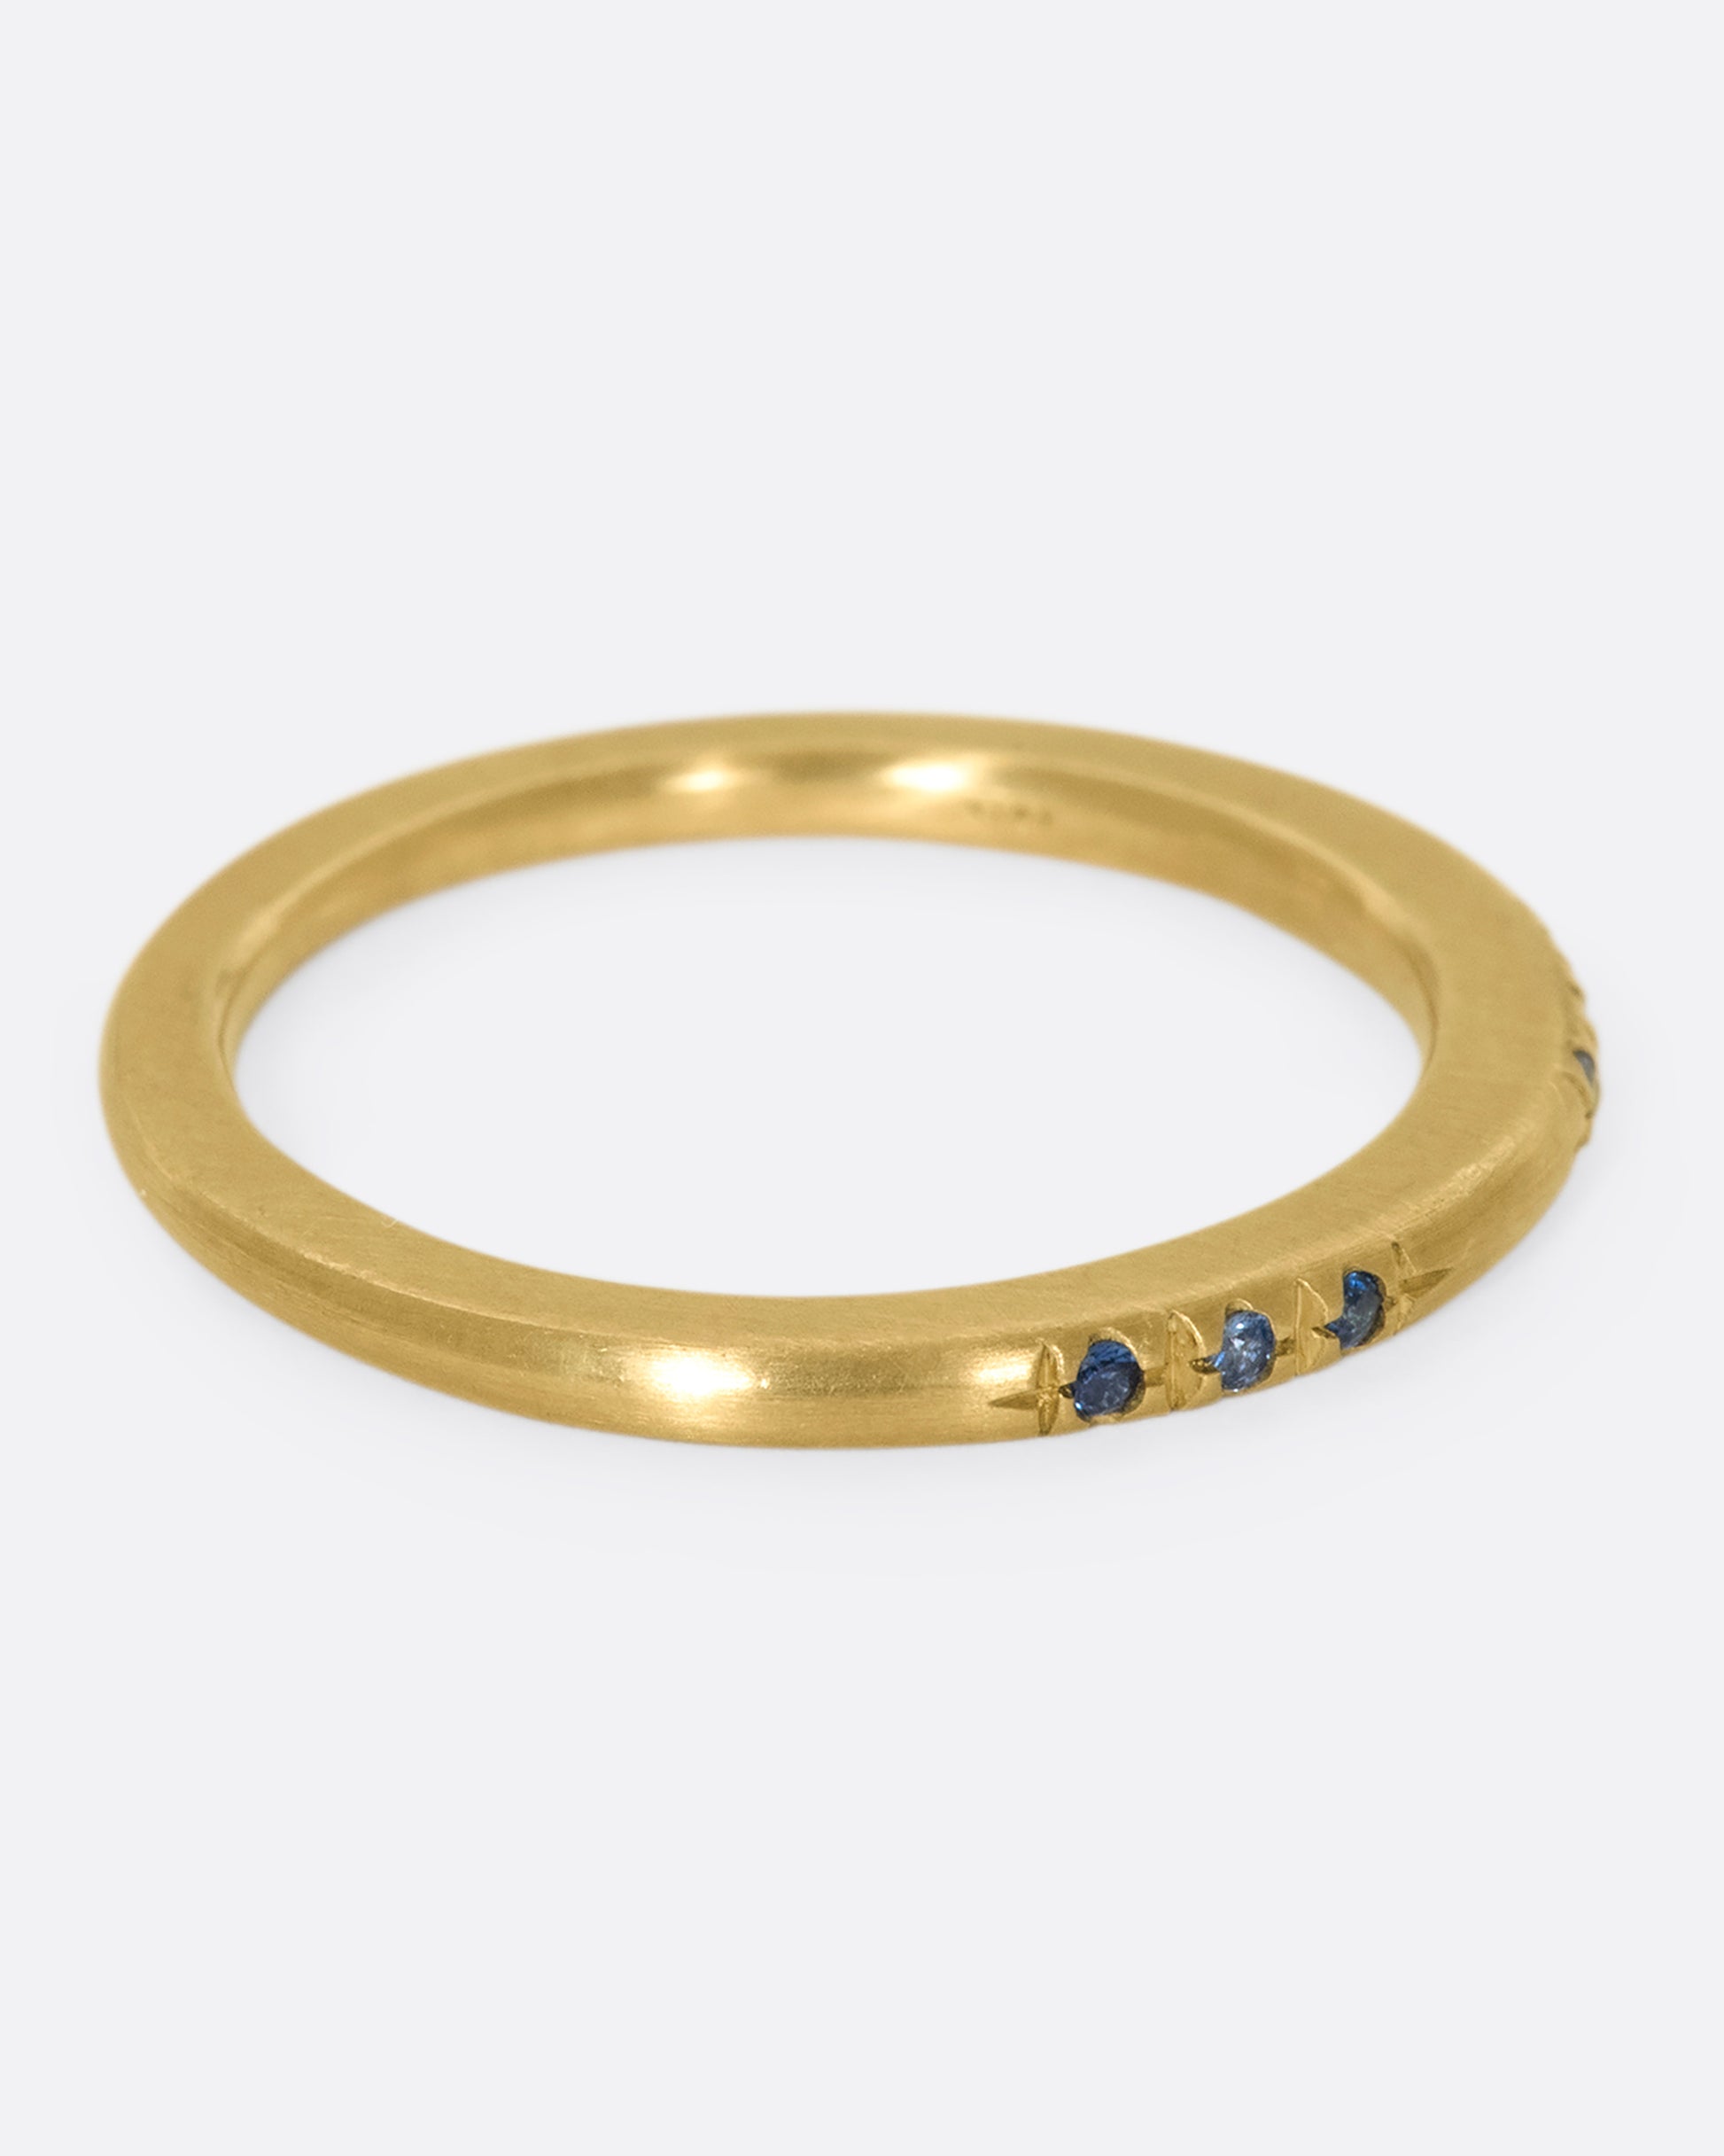 A 10k gold band with light and dark blue sapphires